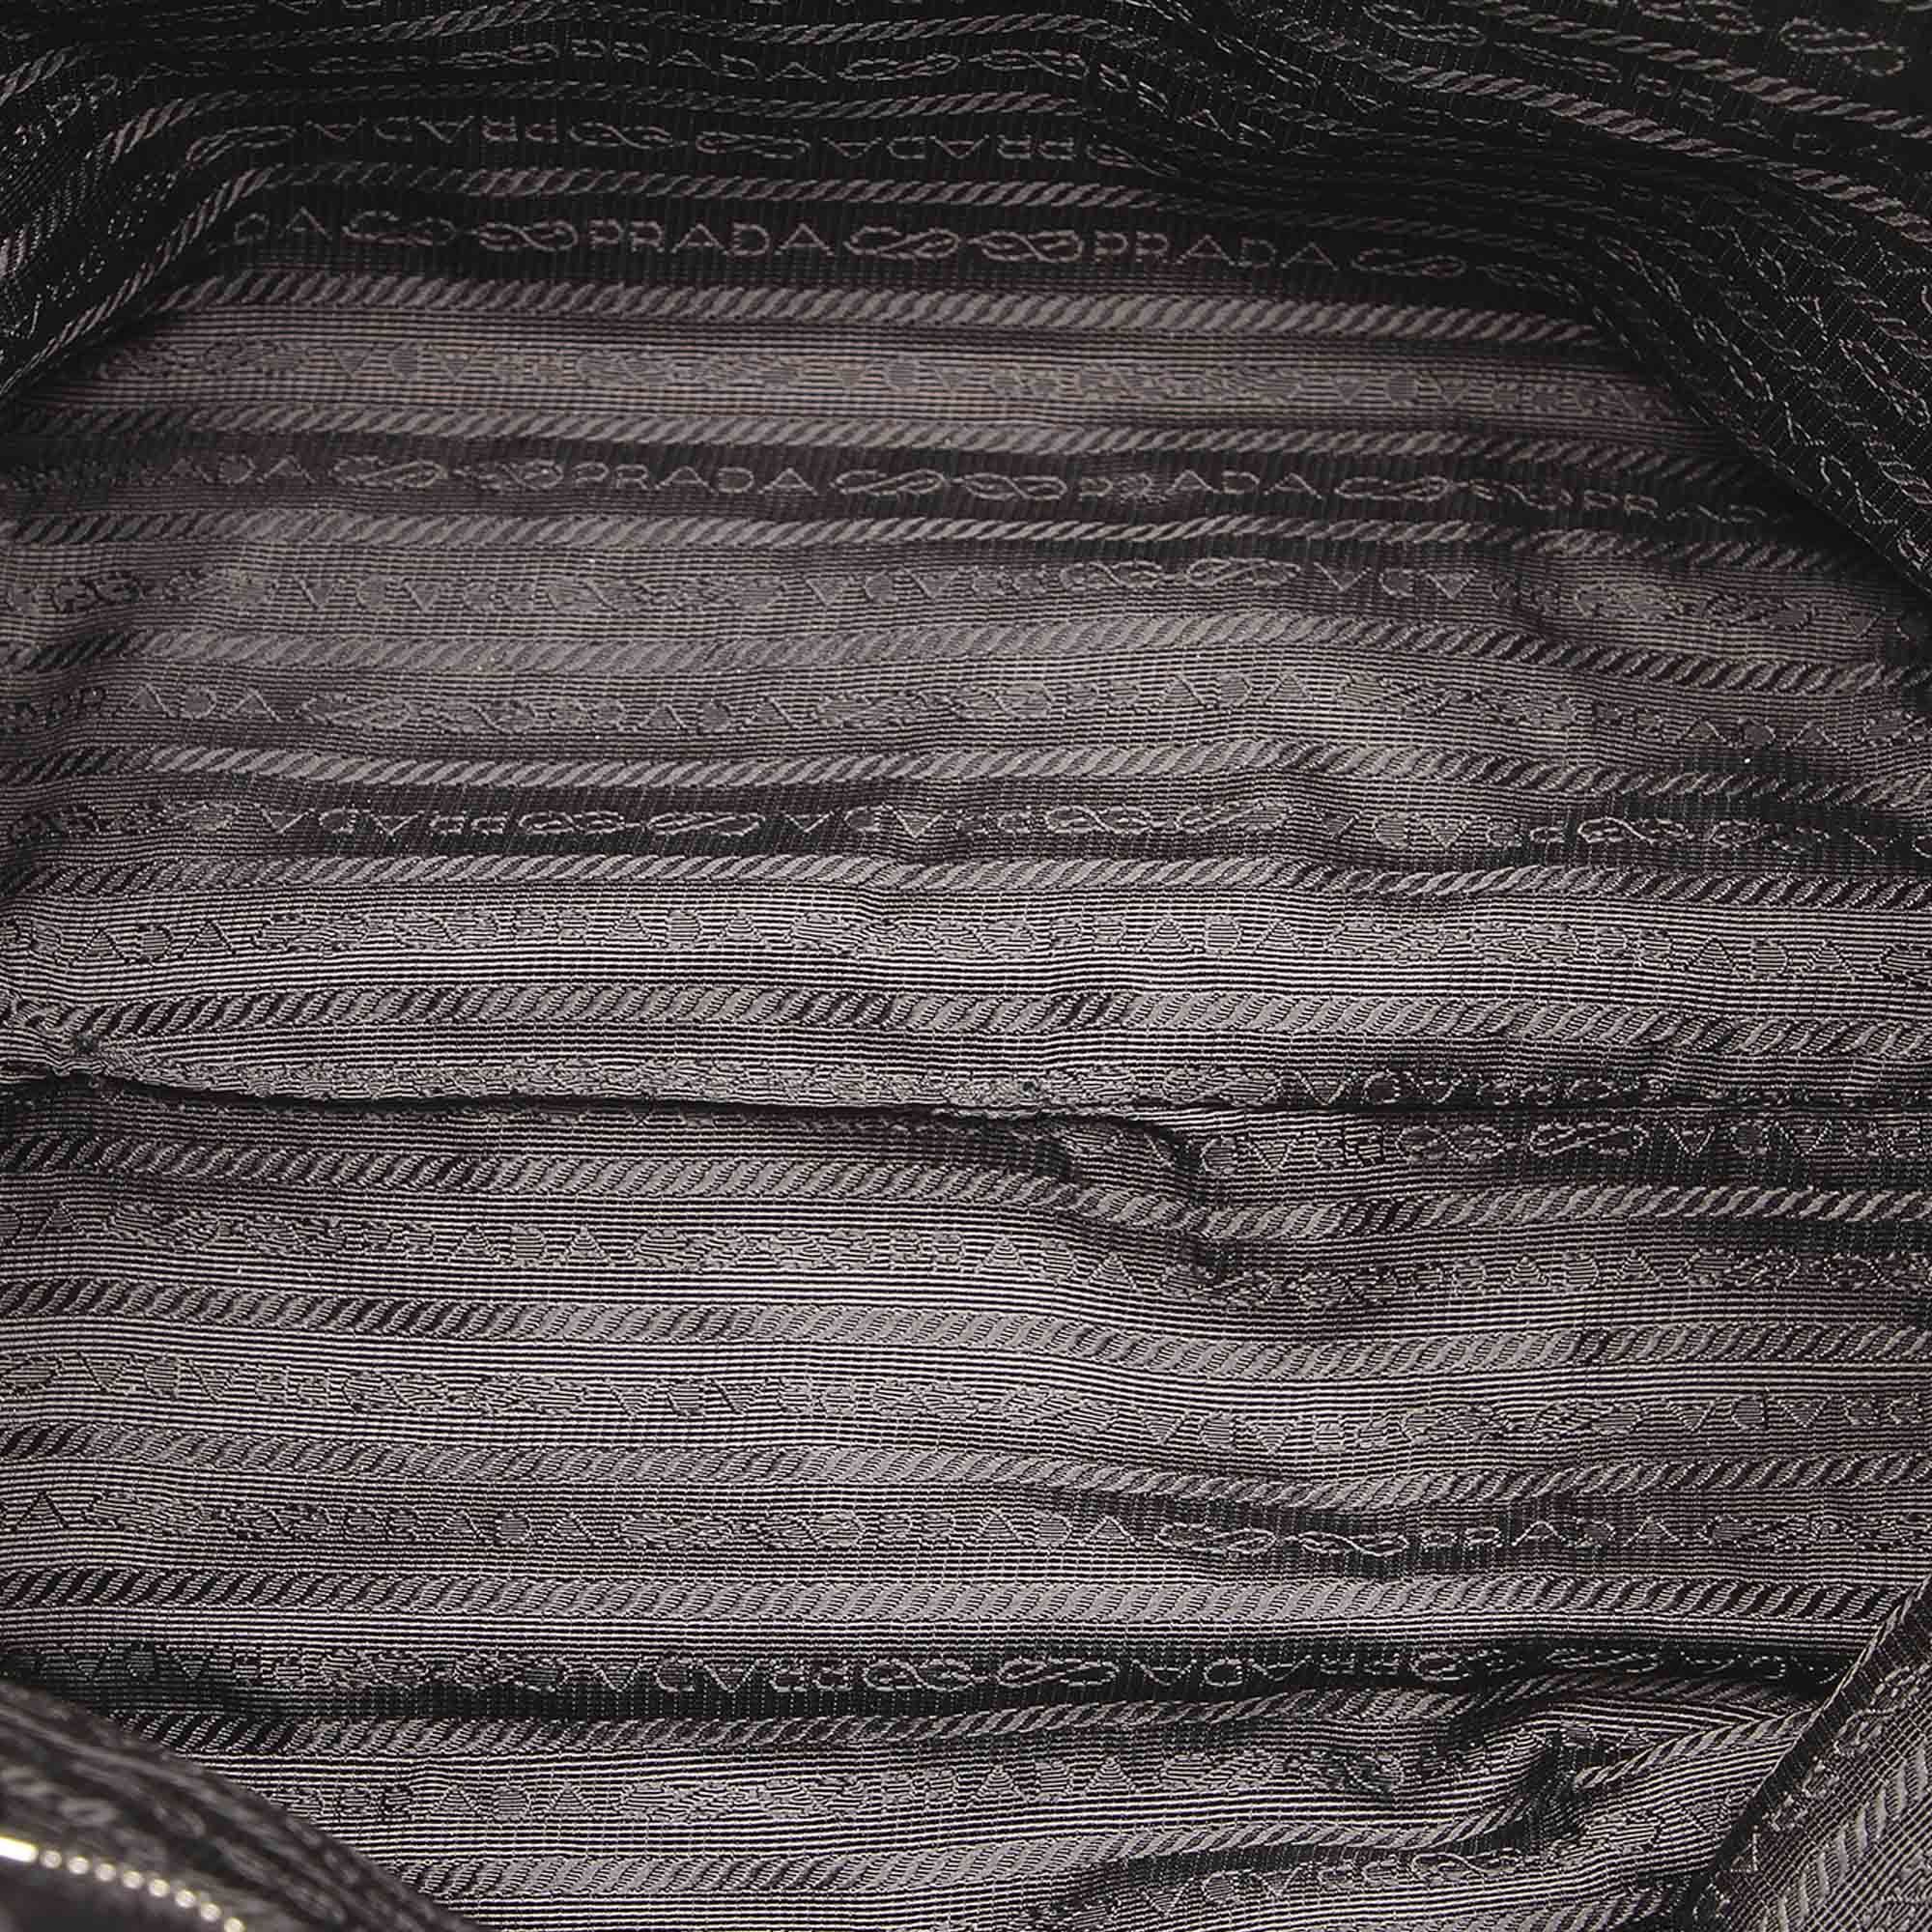 VINTAGE. RRP AS NEW. This handbag features a nylon body with a ribbon detail, rolled leather handles, an open top with a magnetic closure, and an interior zip pockets.Exterior back is discolored and out of shape. Exterior bottom is discolored and out of shape. Exterior corners is discolored and out of shape. Exterior front is discolored and out of shape. Exterior handle is discolored. Exterior side is discolored and out of shape. Studs is tarnished.

Dimensions:
Length 23cm
Width 40cm
Depth 15cm
Hand Drop 10cm
Shoulder Drop 10cm

Original Accessories: Authenticity Card

Serial Number: BN1601
Color: Black
Material: Fabric x Nylon x Leather x Calf
Country of Origin: Italy
Boutique Reference: SSU90102K1342


Product Rating: GoodCondition